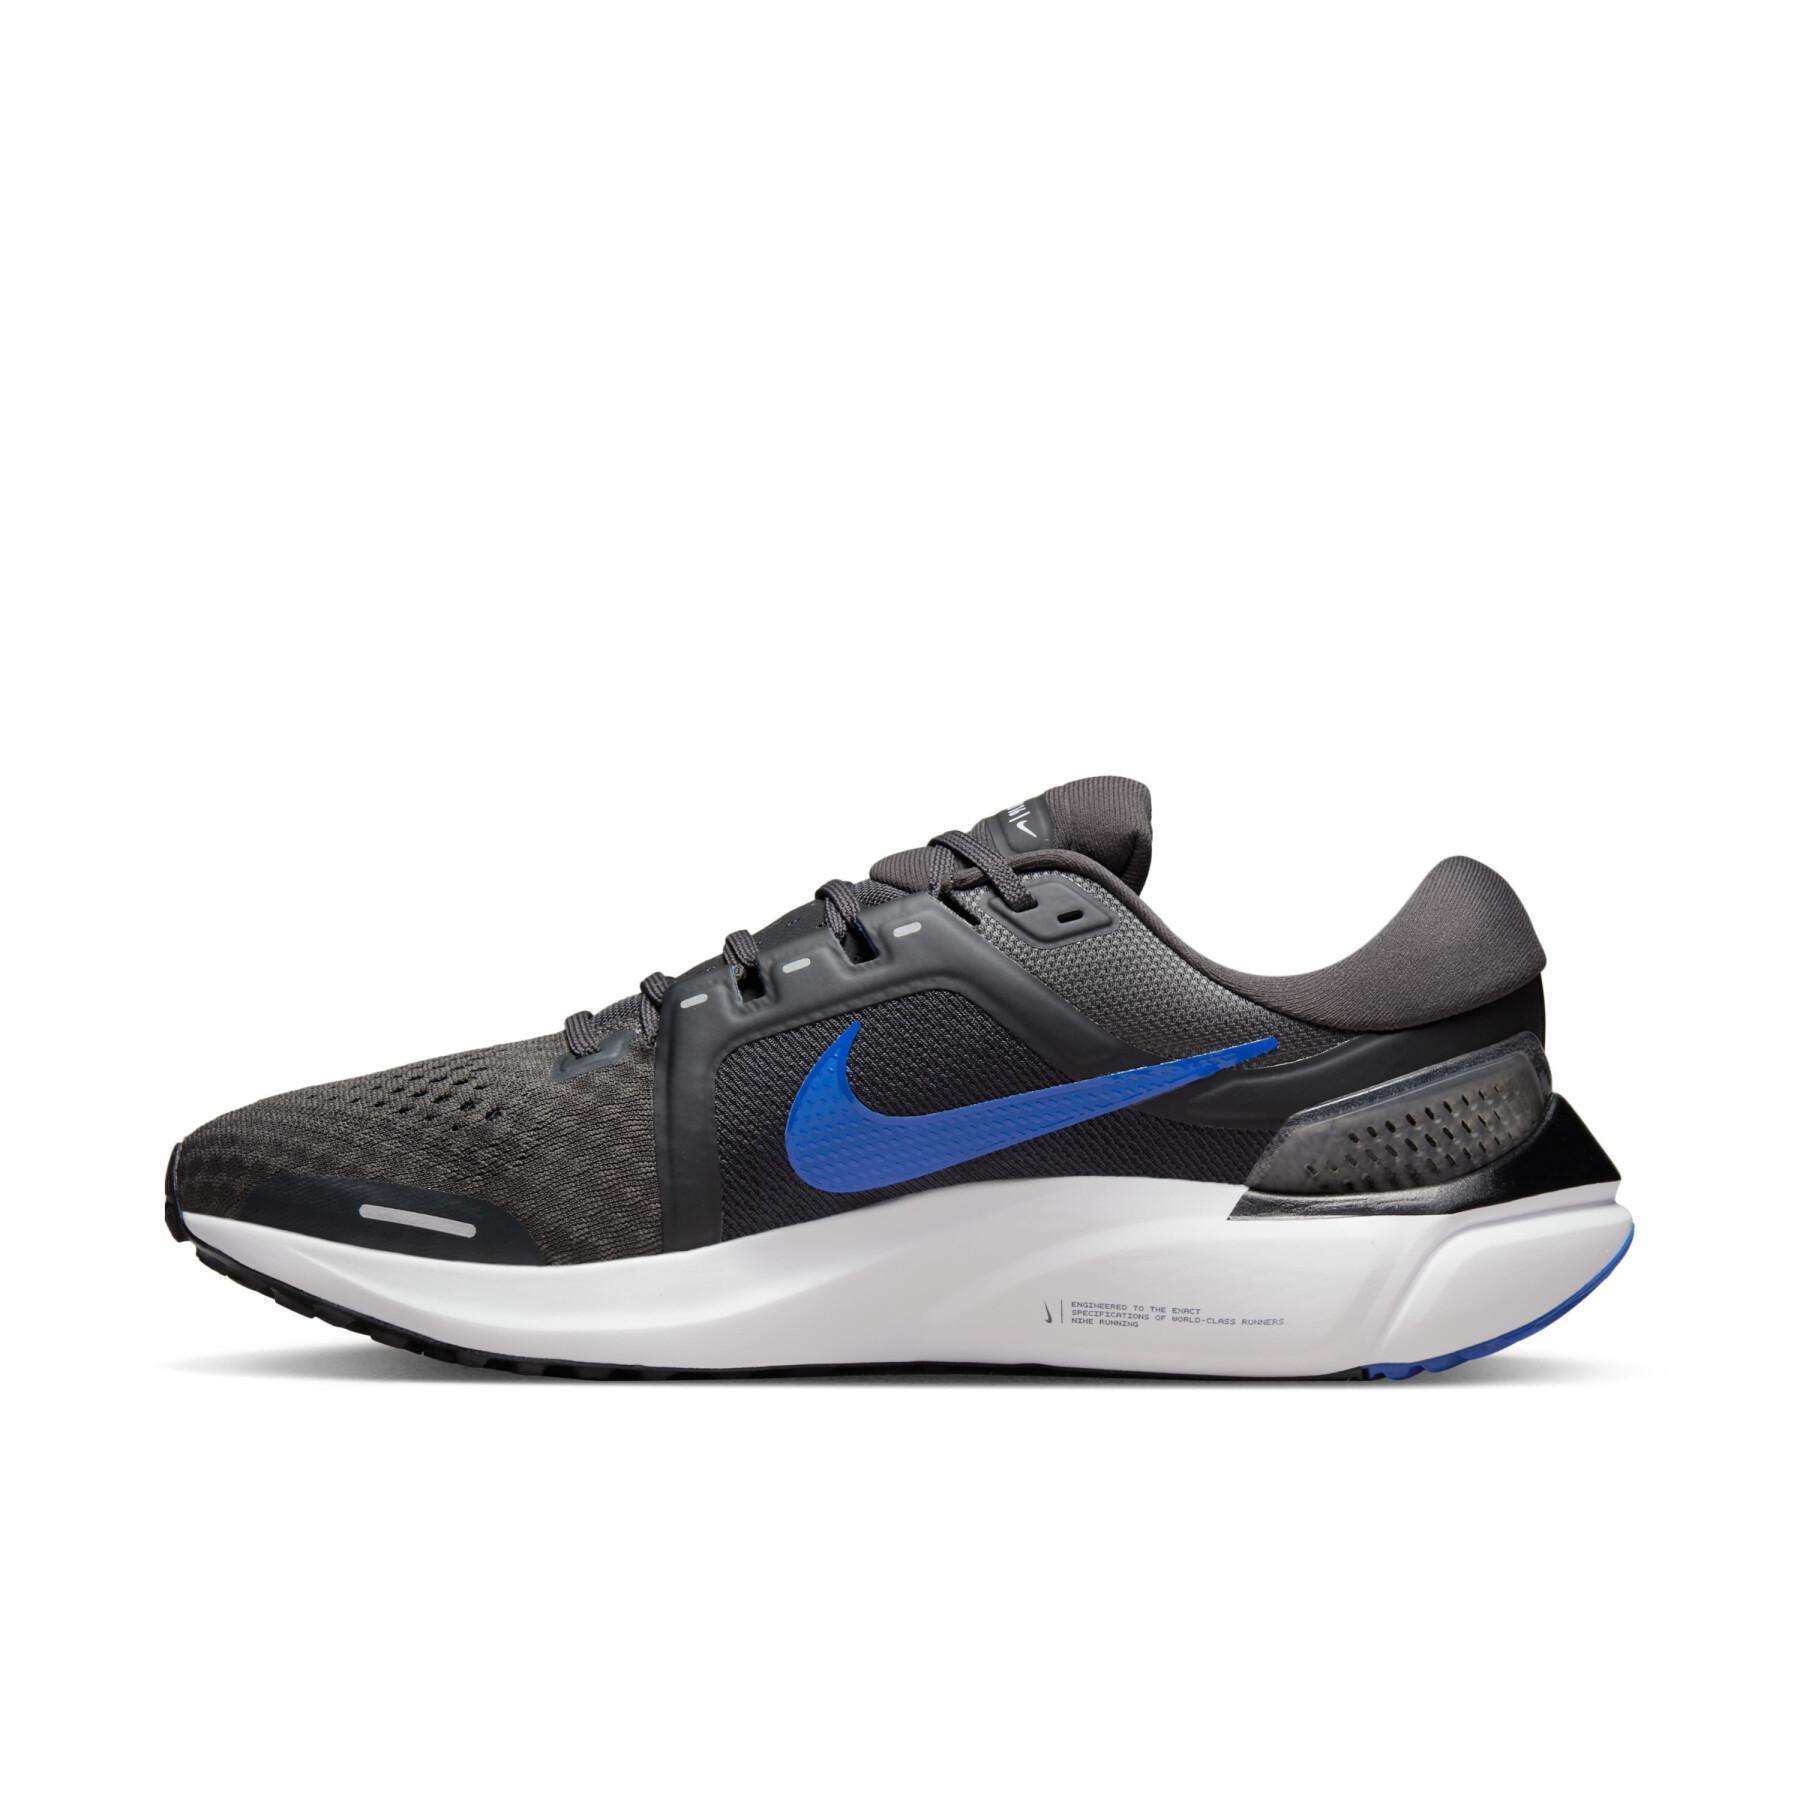 Running shoes Nike Air Zoom Vomero 16